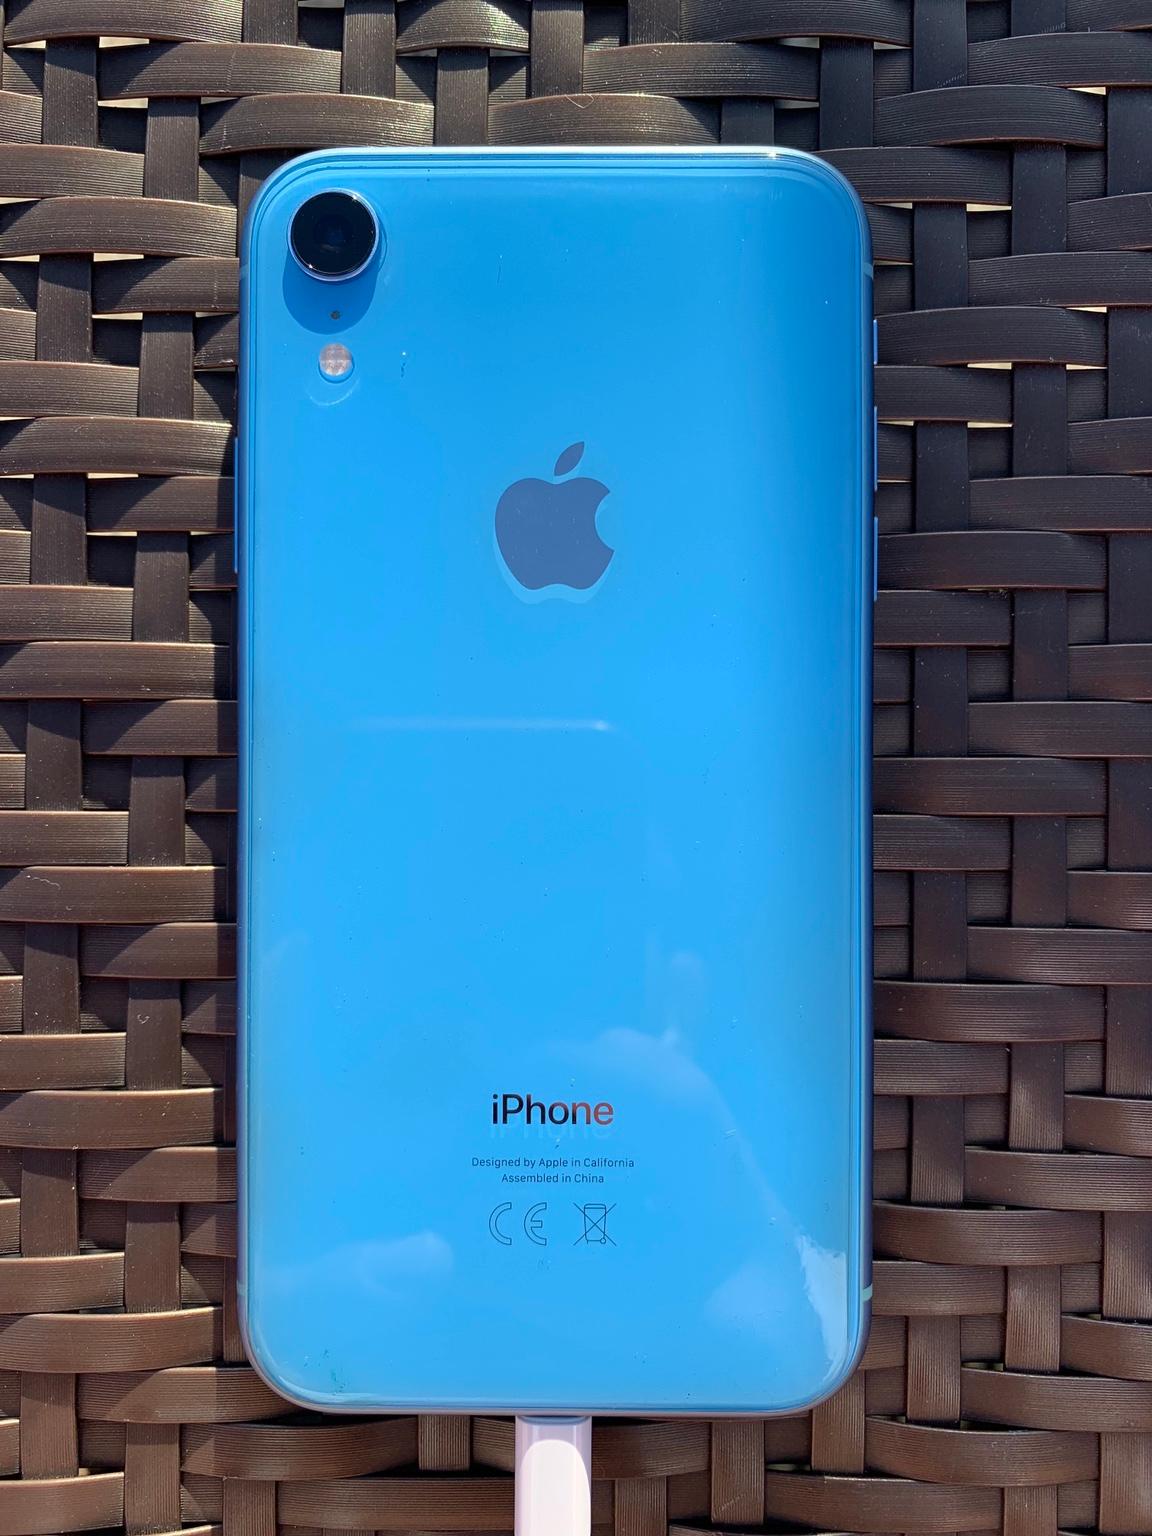 Iphone Xr 64 Gb In Blau In Potsdam For 570 00 For Sale Shpock